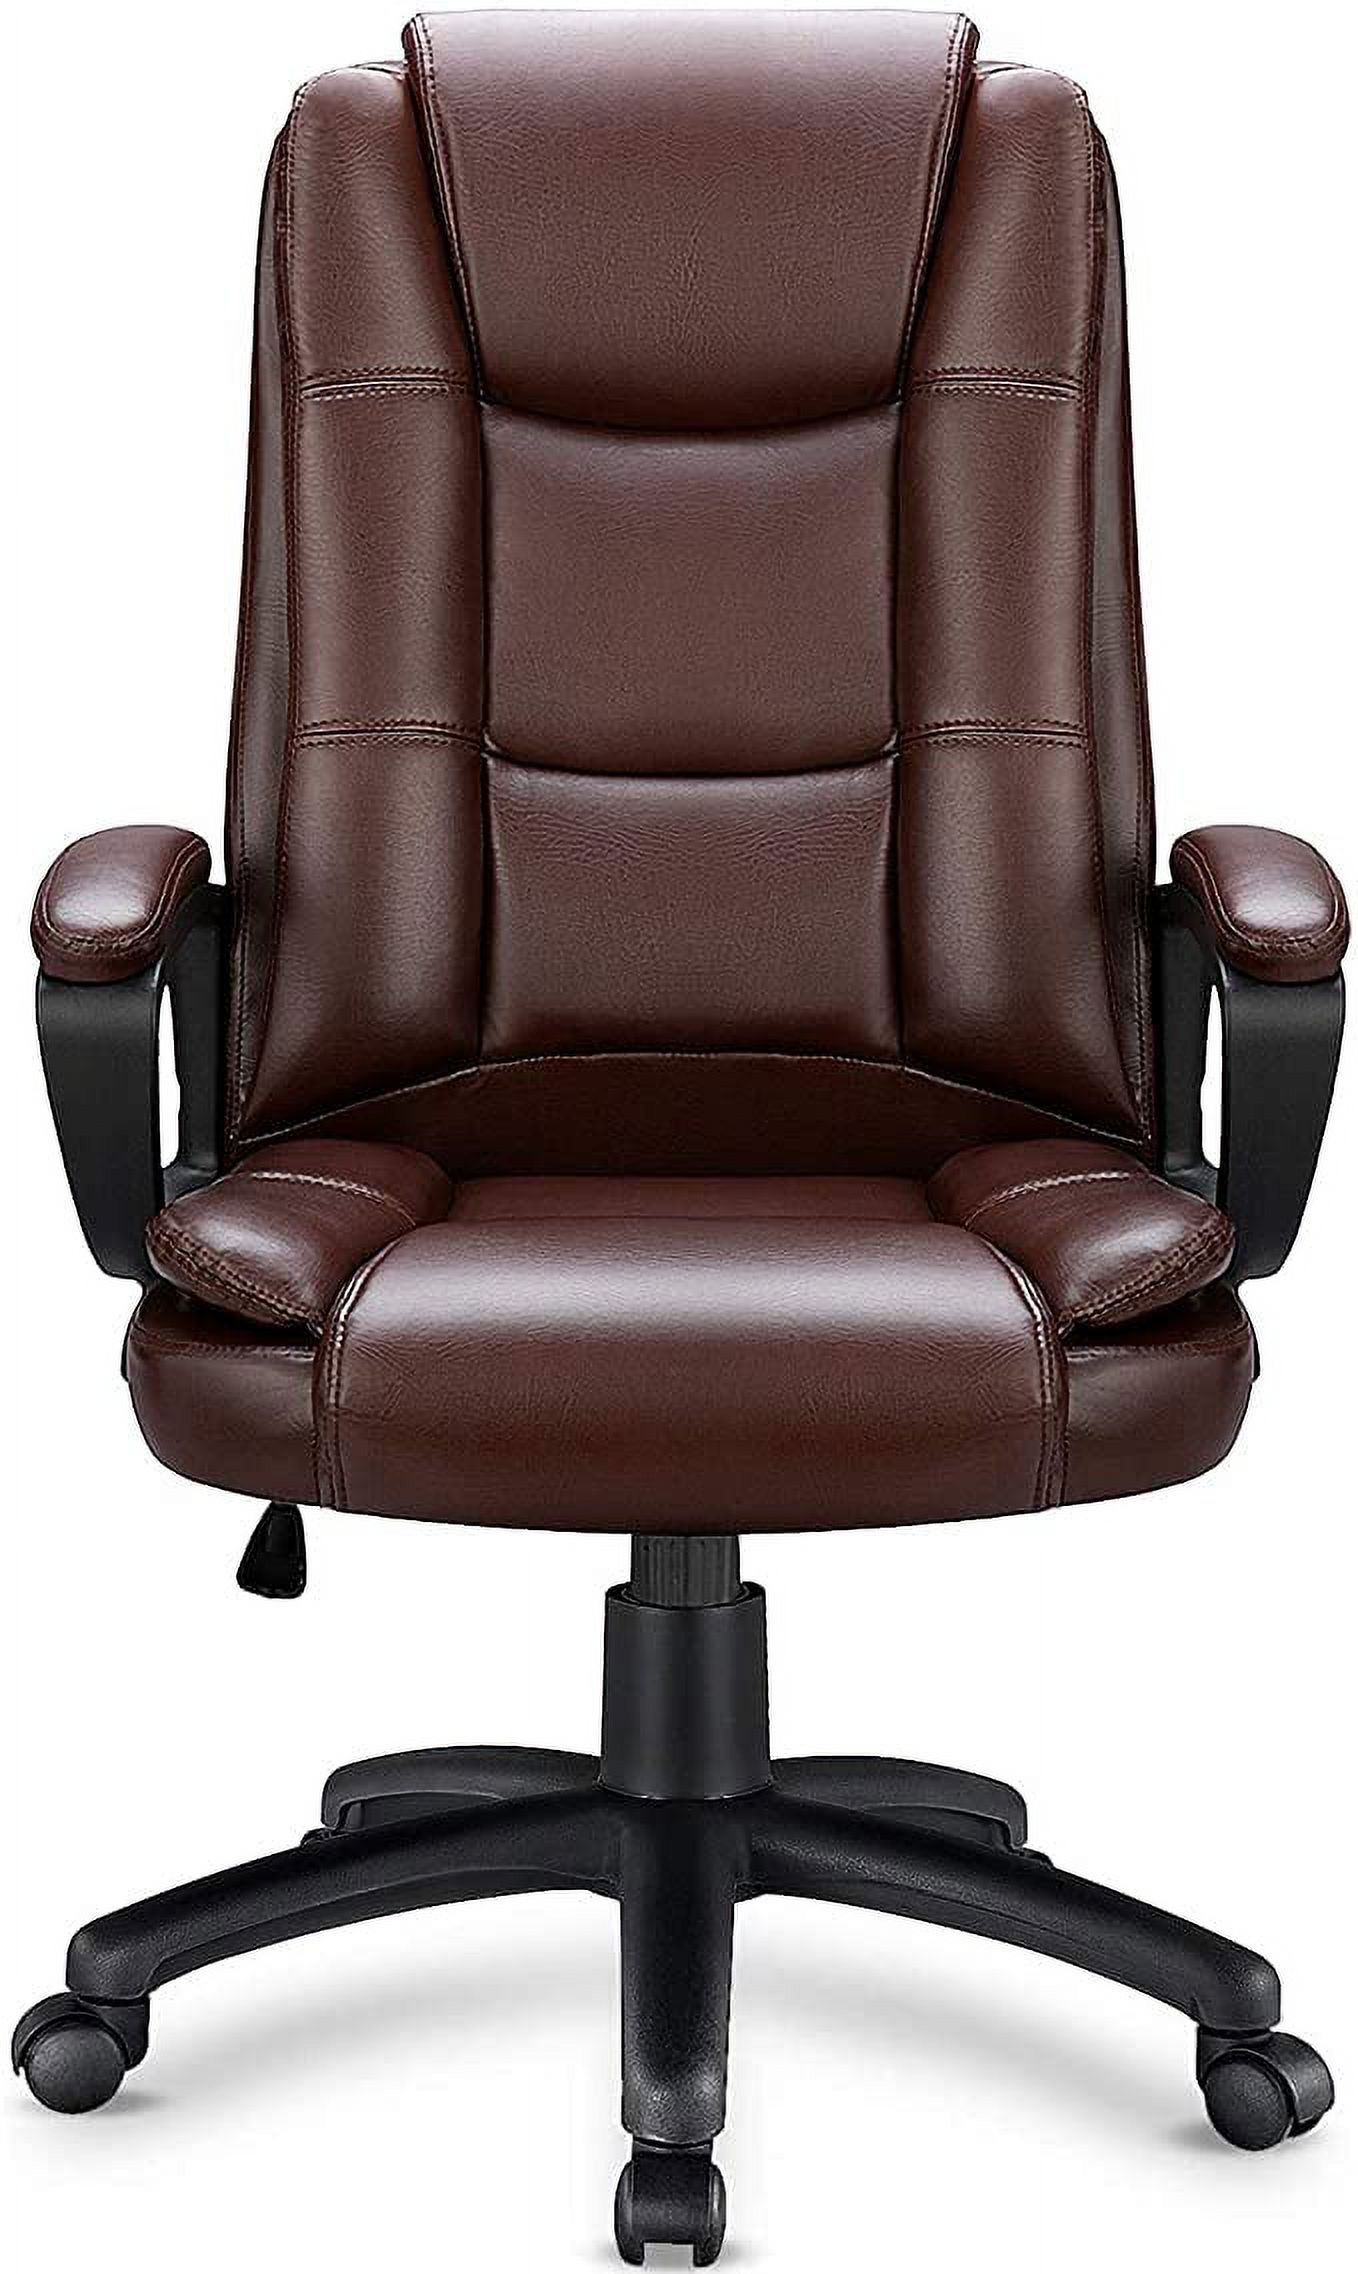 Vitesse Home Office Chair, Big and Tall Chair 8 Hours Heavy Duty Design, Ergonomic High Back Cushion Lumbar Back Support, Computer Desk Chair, , Adjustable Executive Leather Chair With Arms (Brown) - image 1 of 7